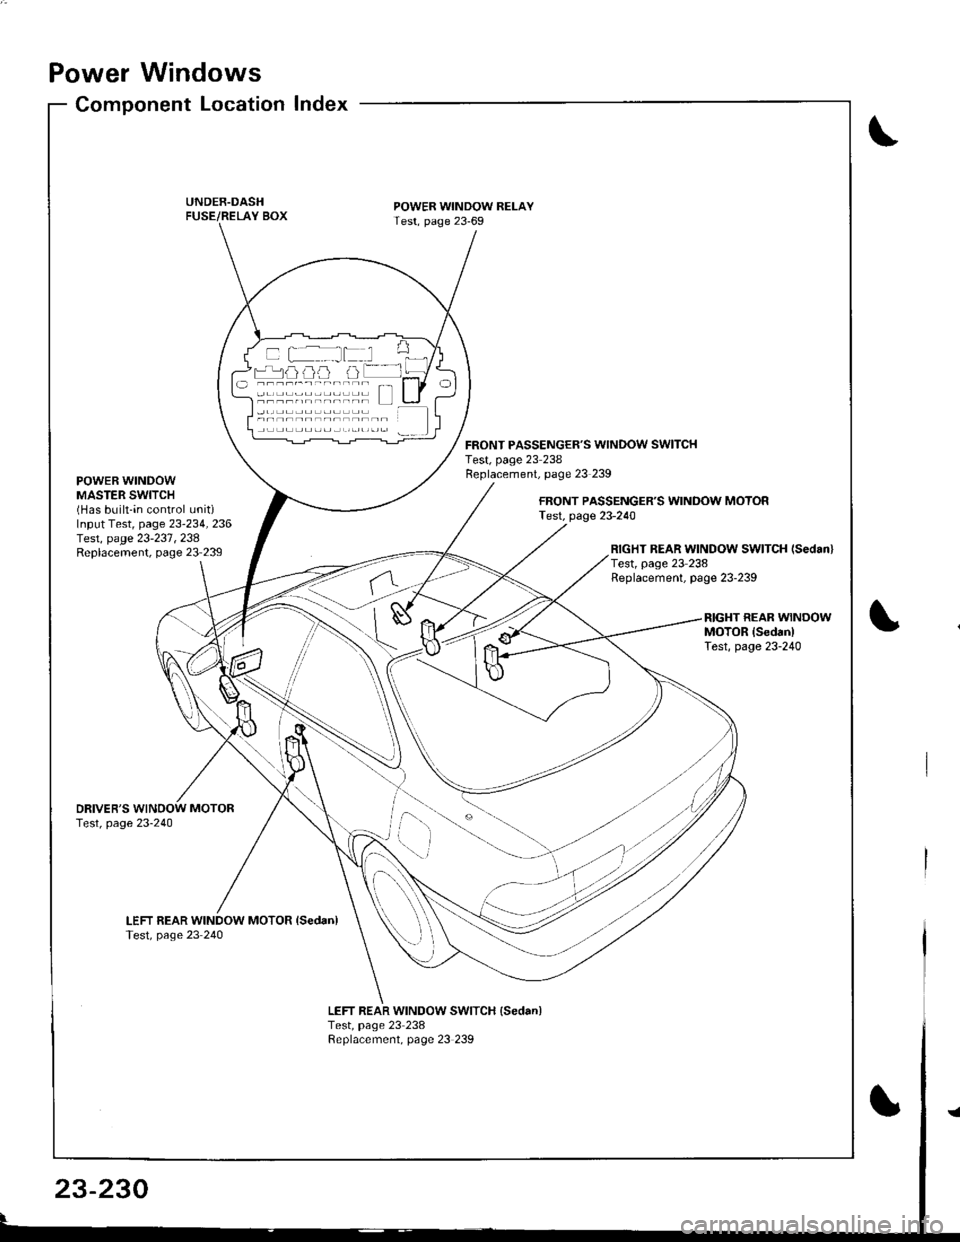 HONDA INTEGRA 1998 4.G Workshop Manual Power Windows
POWER WINDOWMASTER SWITCH(Has built-in control unitiInput Test, page 23-234, 236Iesr, page 23-231 ,238Replacement, page 23239
Component Location Index
UNDER.DASHFUSE/RELAY BOX
DRIVERS